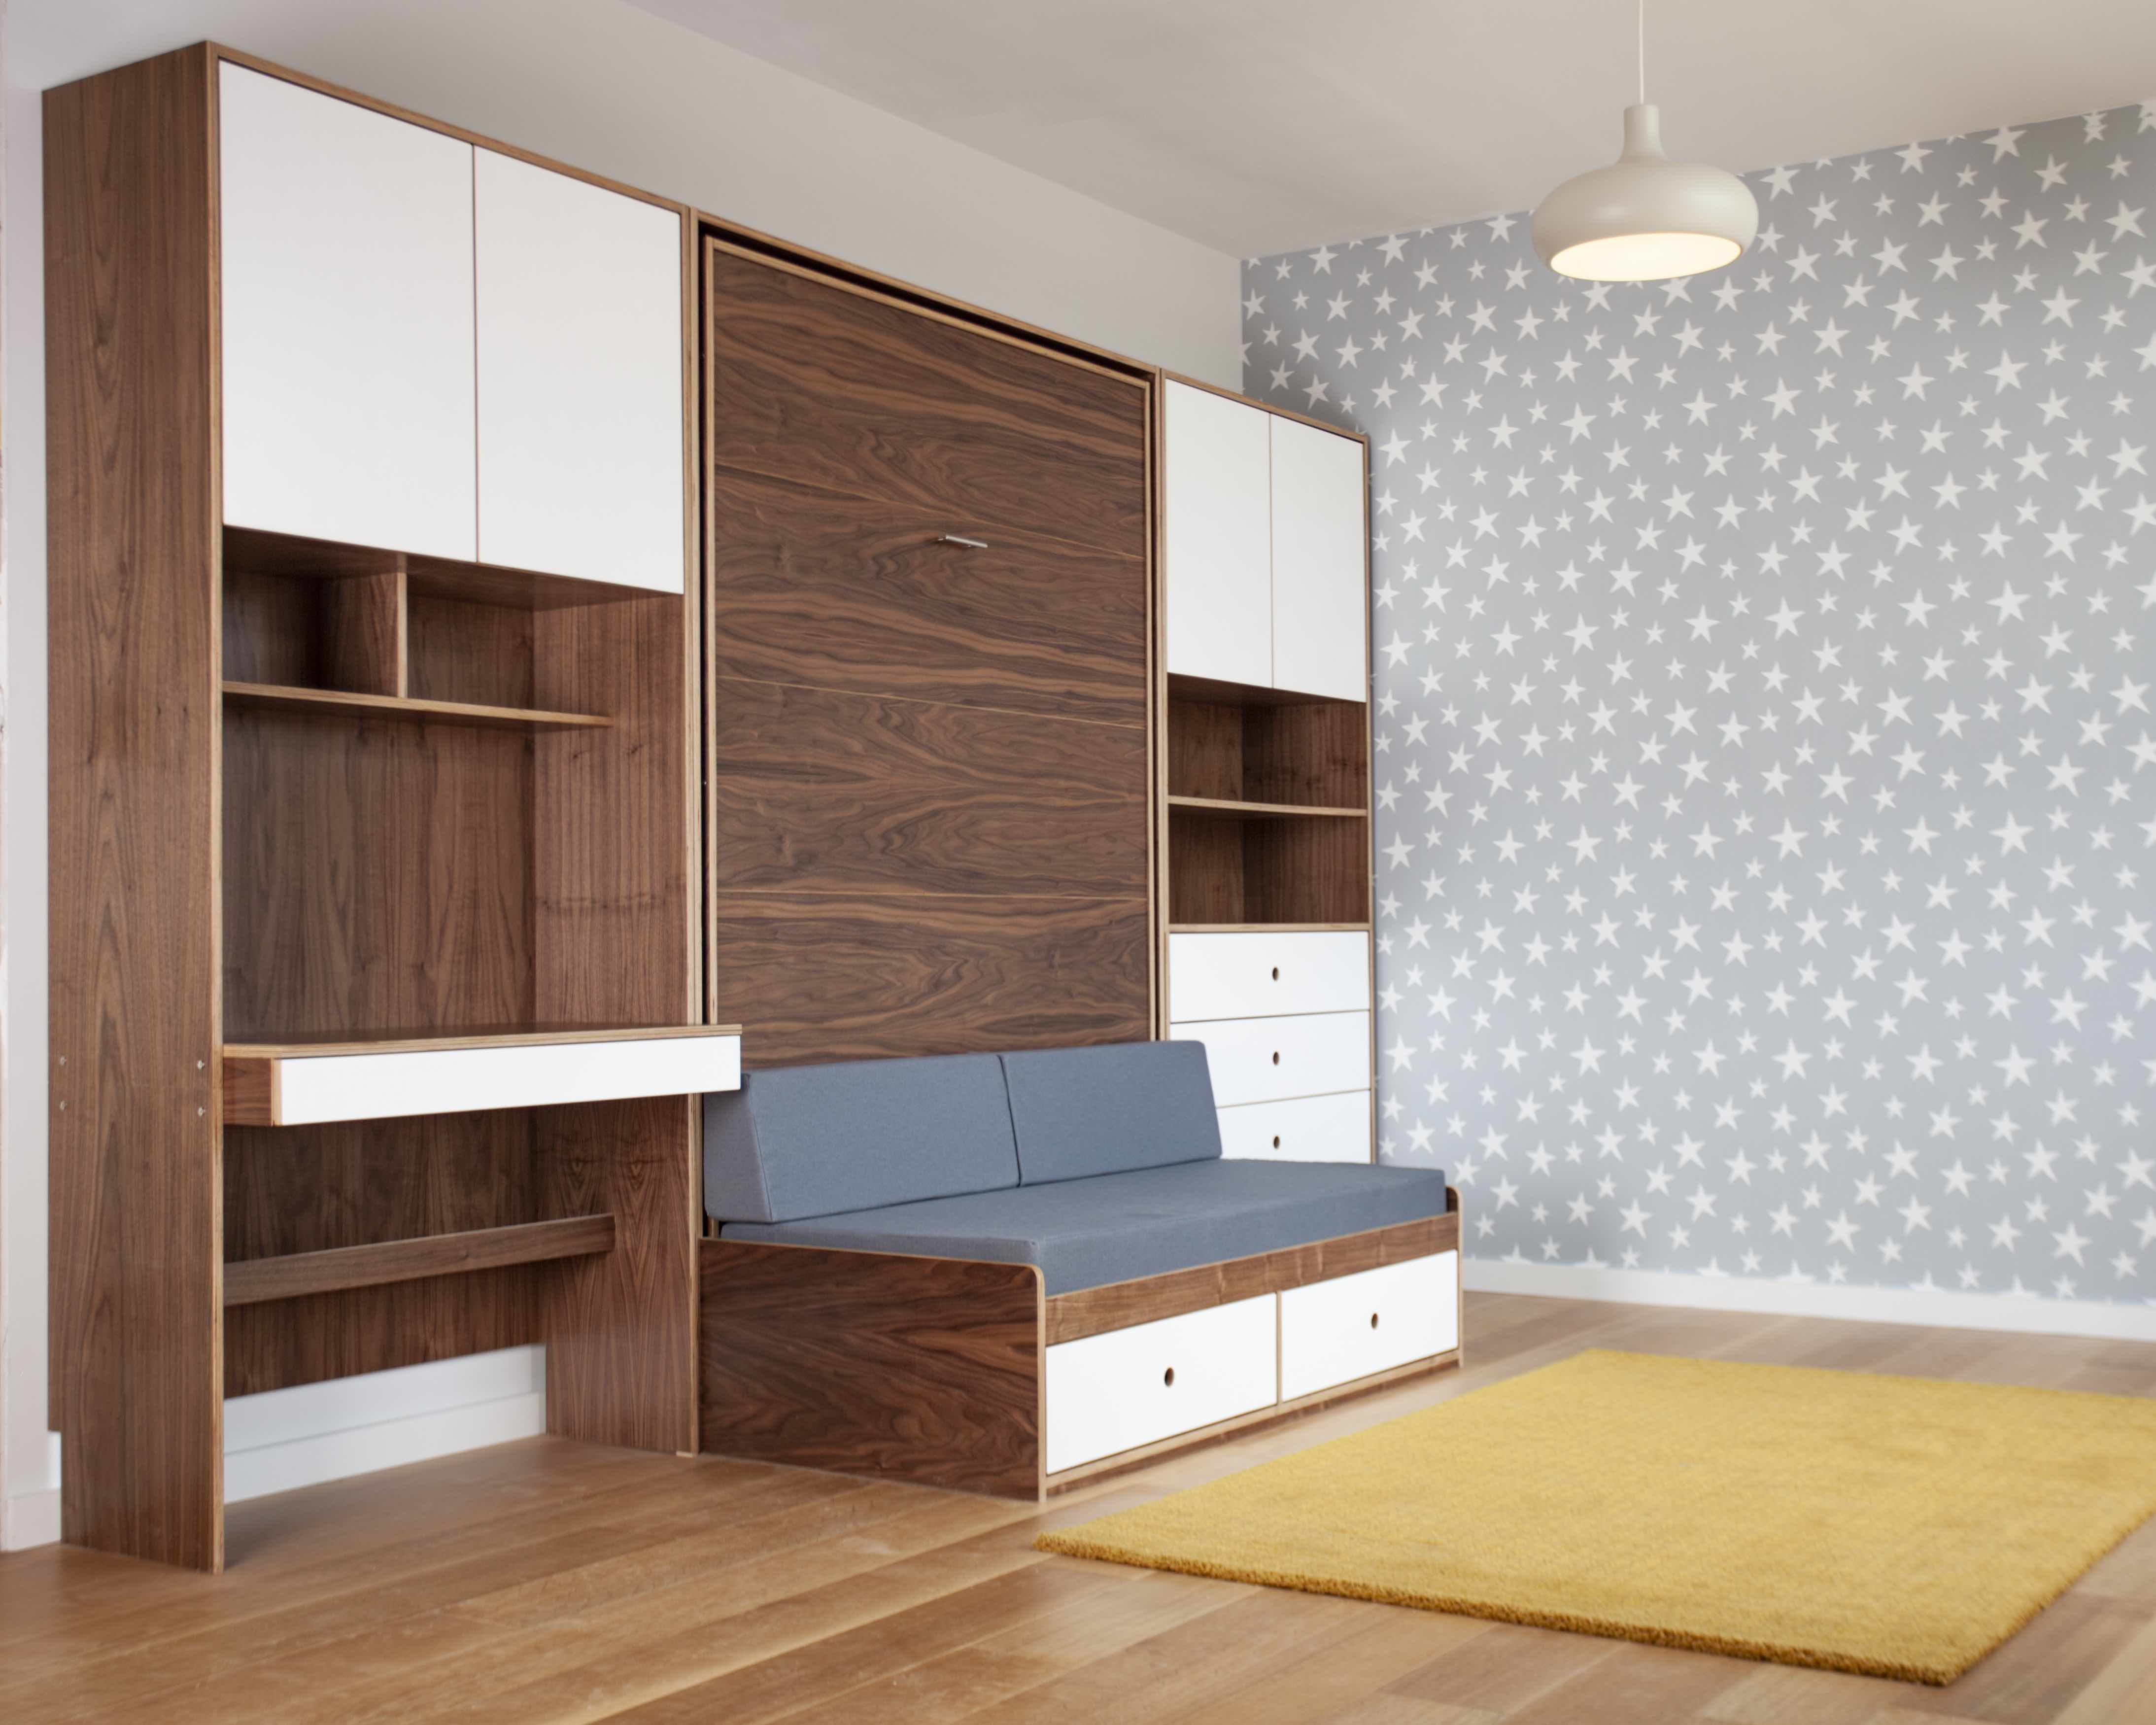 Modern room with wooden wall units, blue daybed, white and brown cabinets, and a yellow rug.